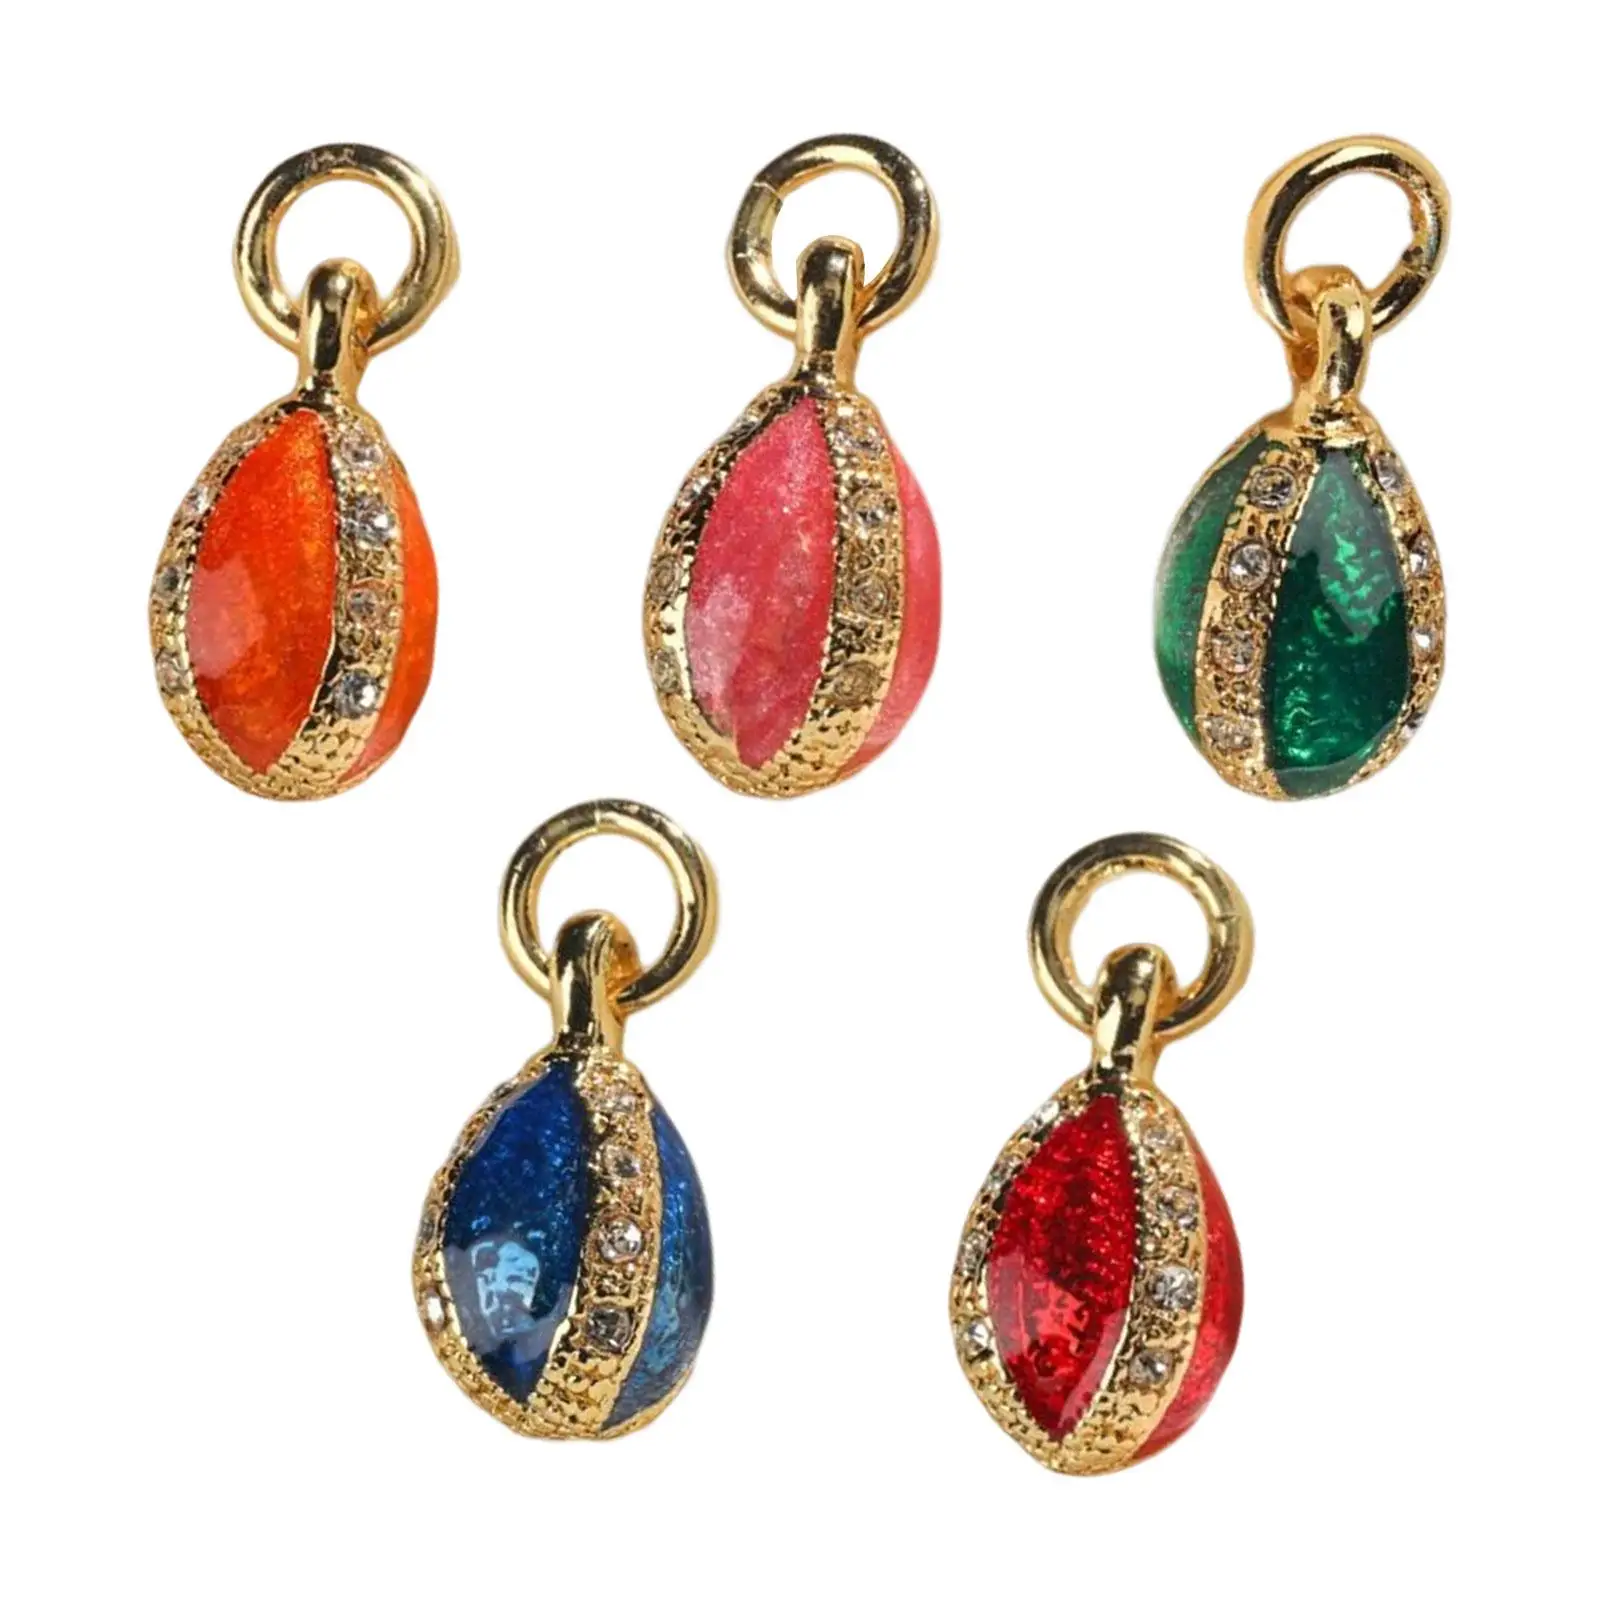 Enamel Easter Egg Pendant Charm Festival Mini Decoration Accessories Metal Gift for Keychain DIY Crafts Bracelet Jewelry Making